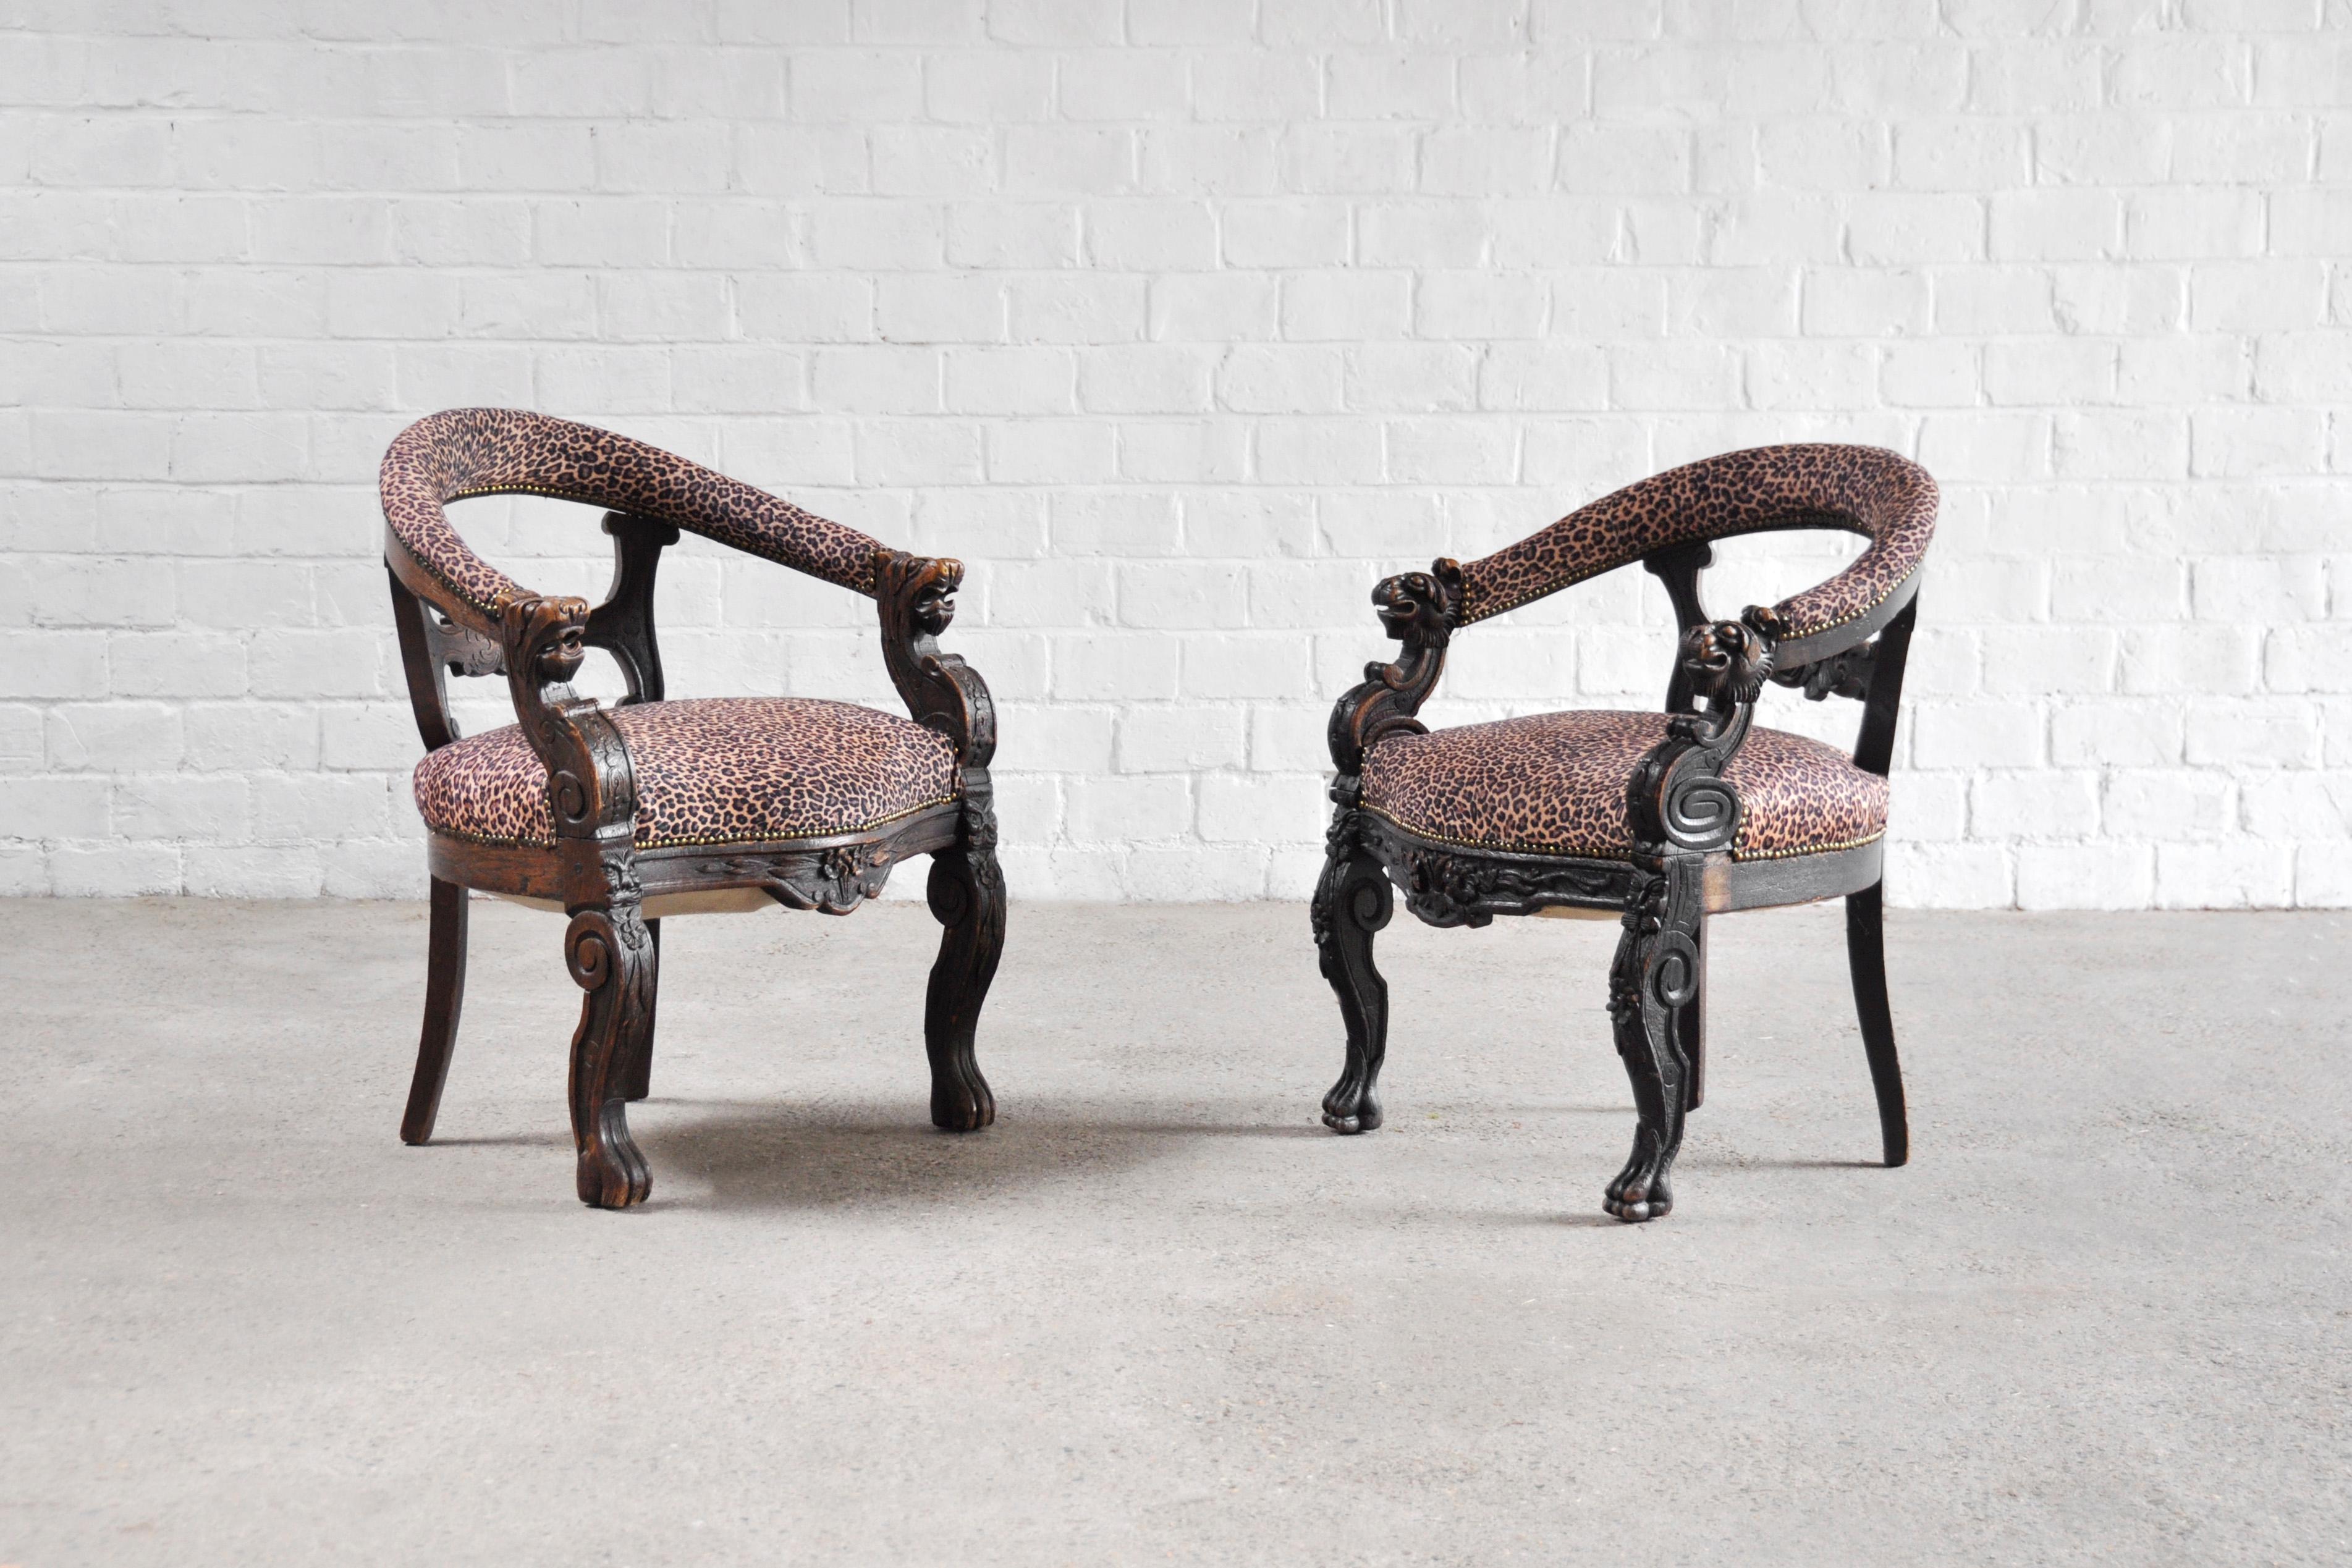 19th Century Carved Oak Tub Chairs with Leopard Print Upholstery, Set of 2 For Sale 1